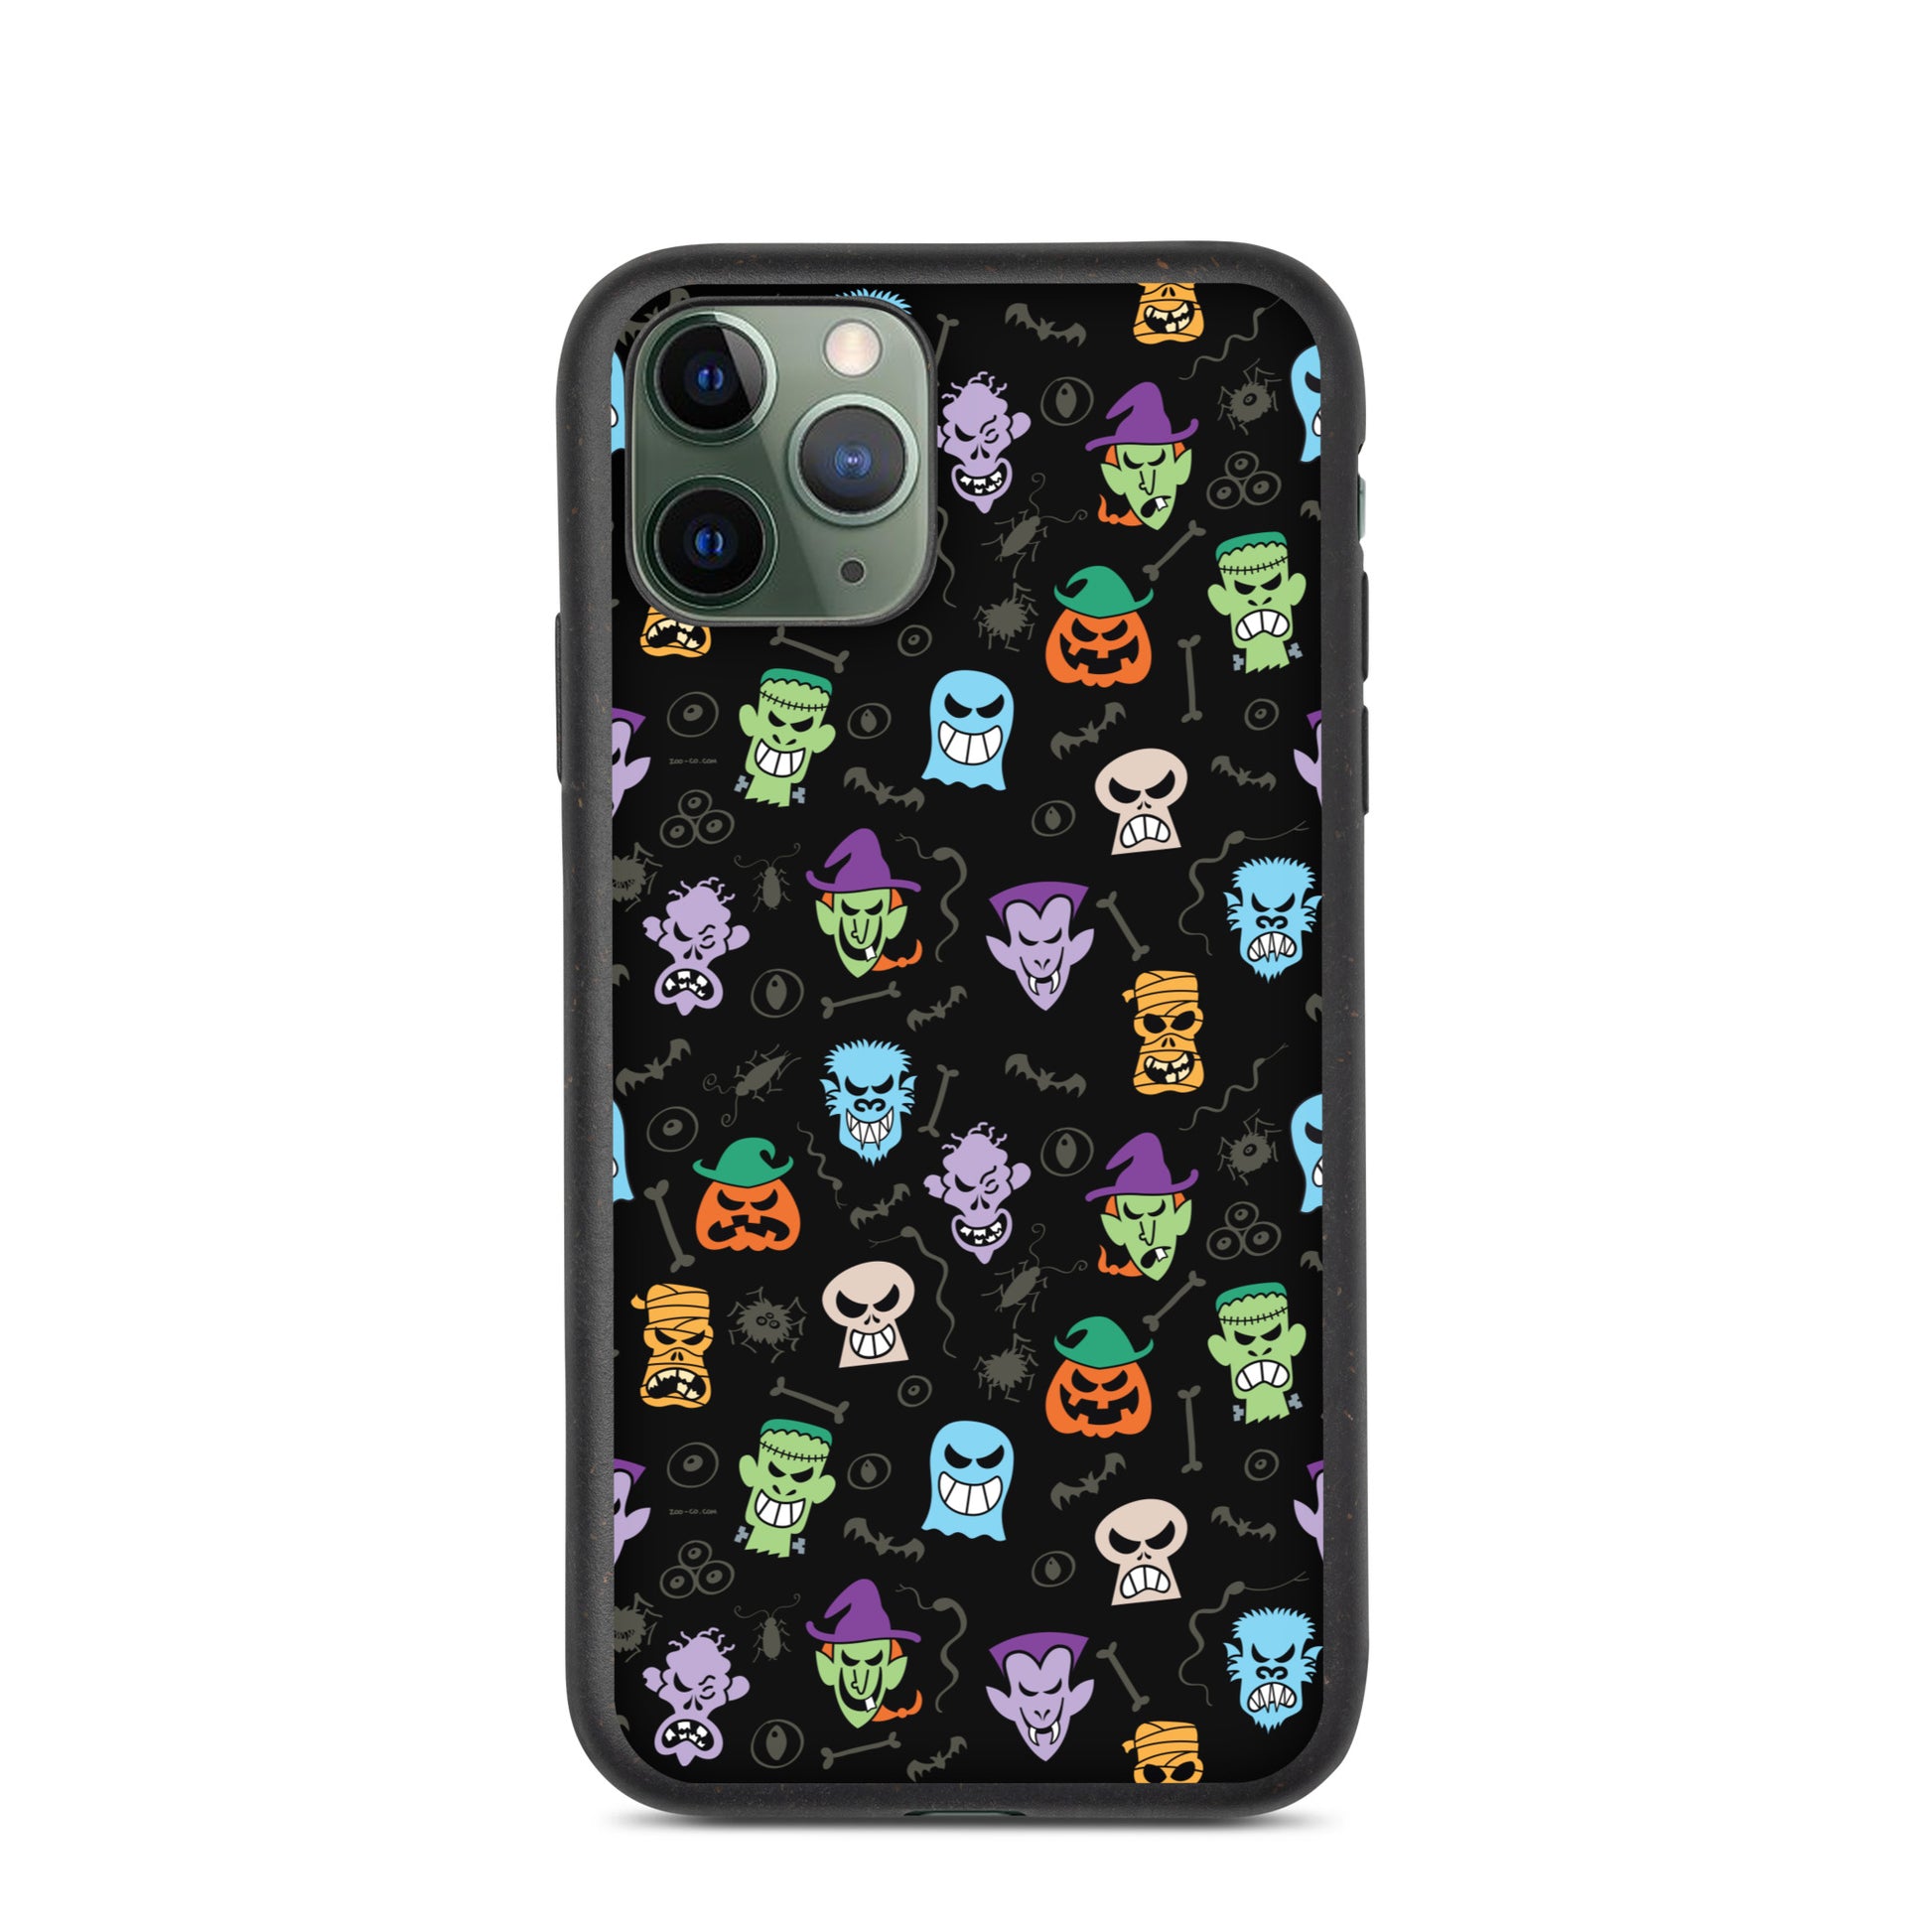 Scary Halloween faces Speckled iPhone case. iPhone 11 pro